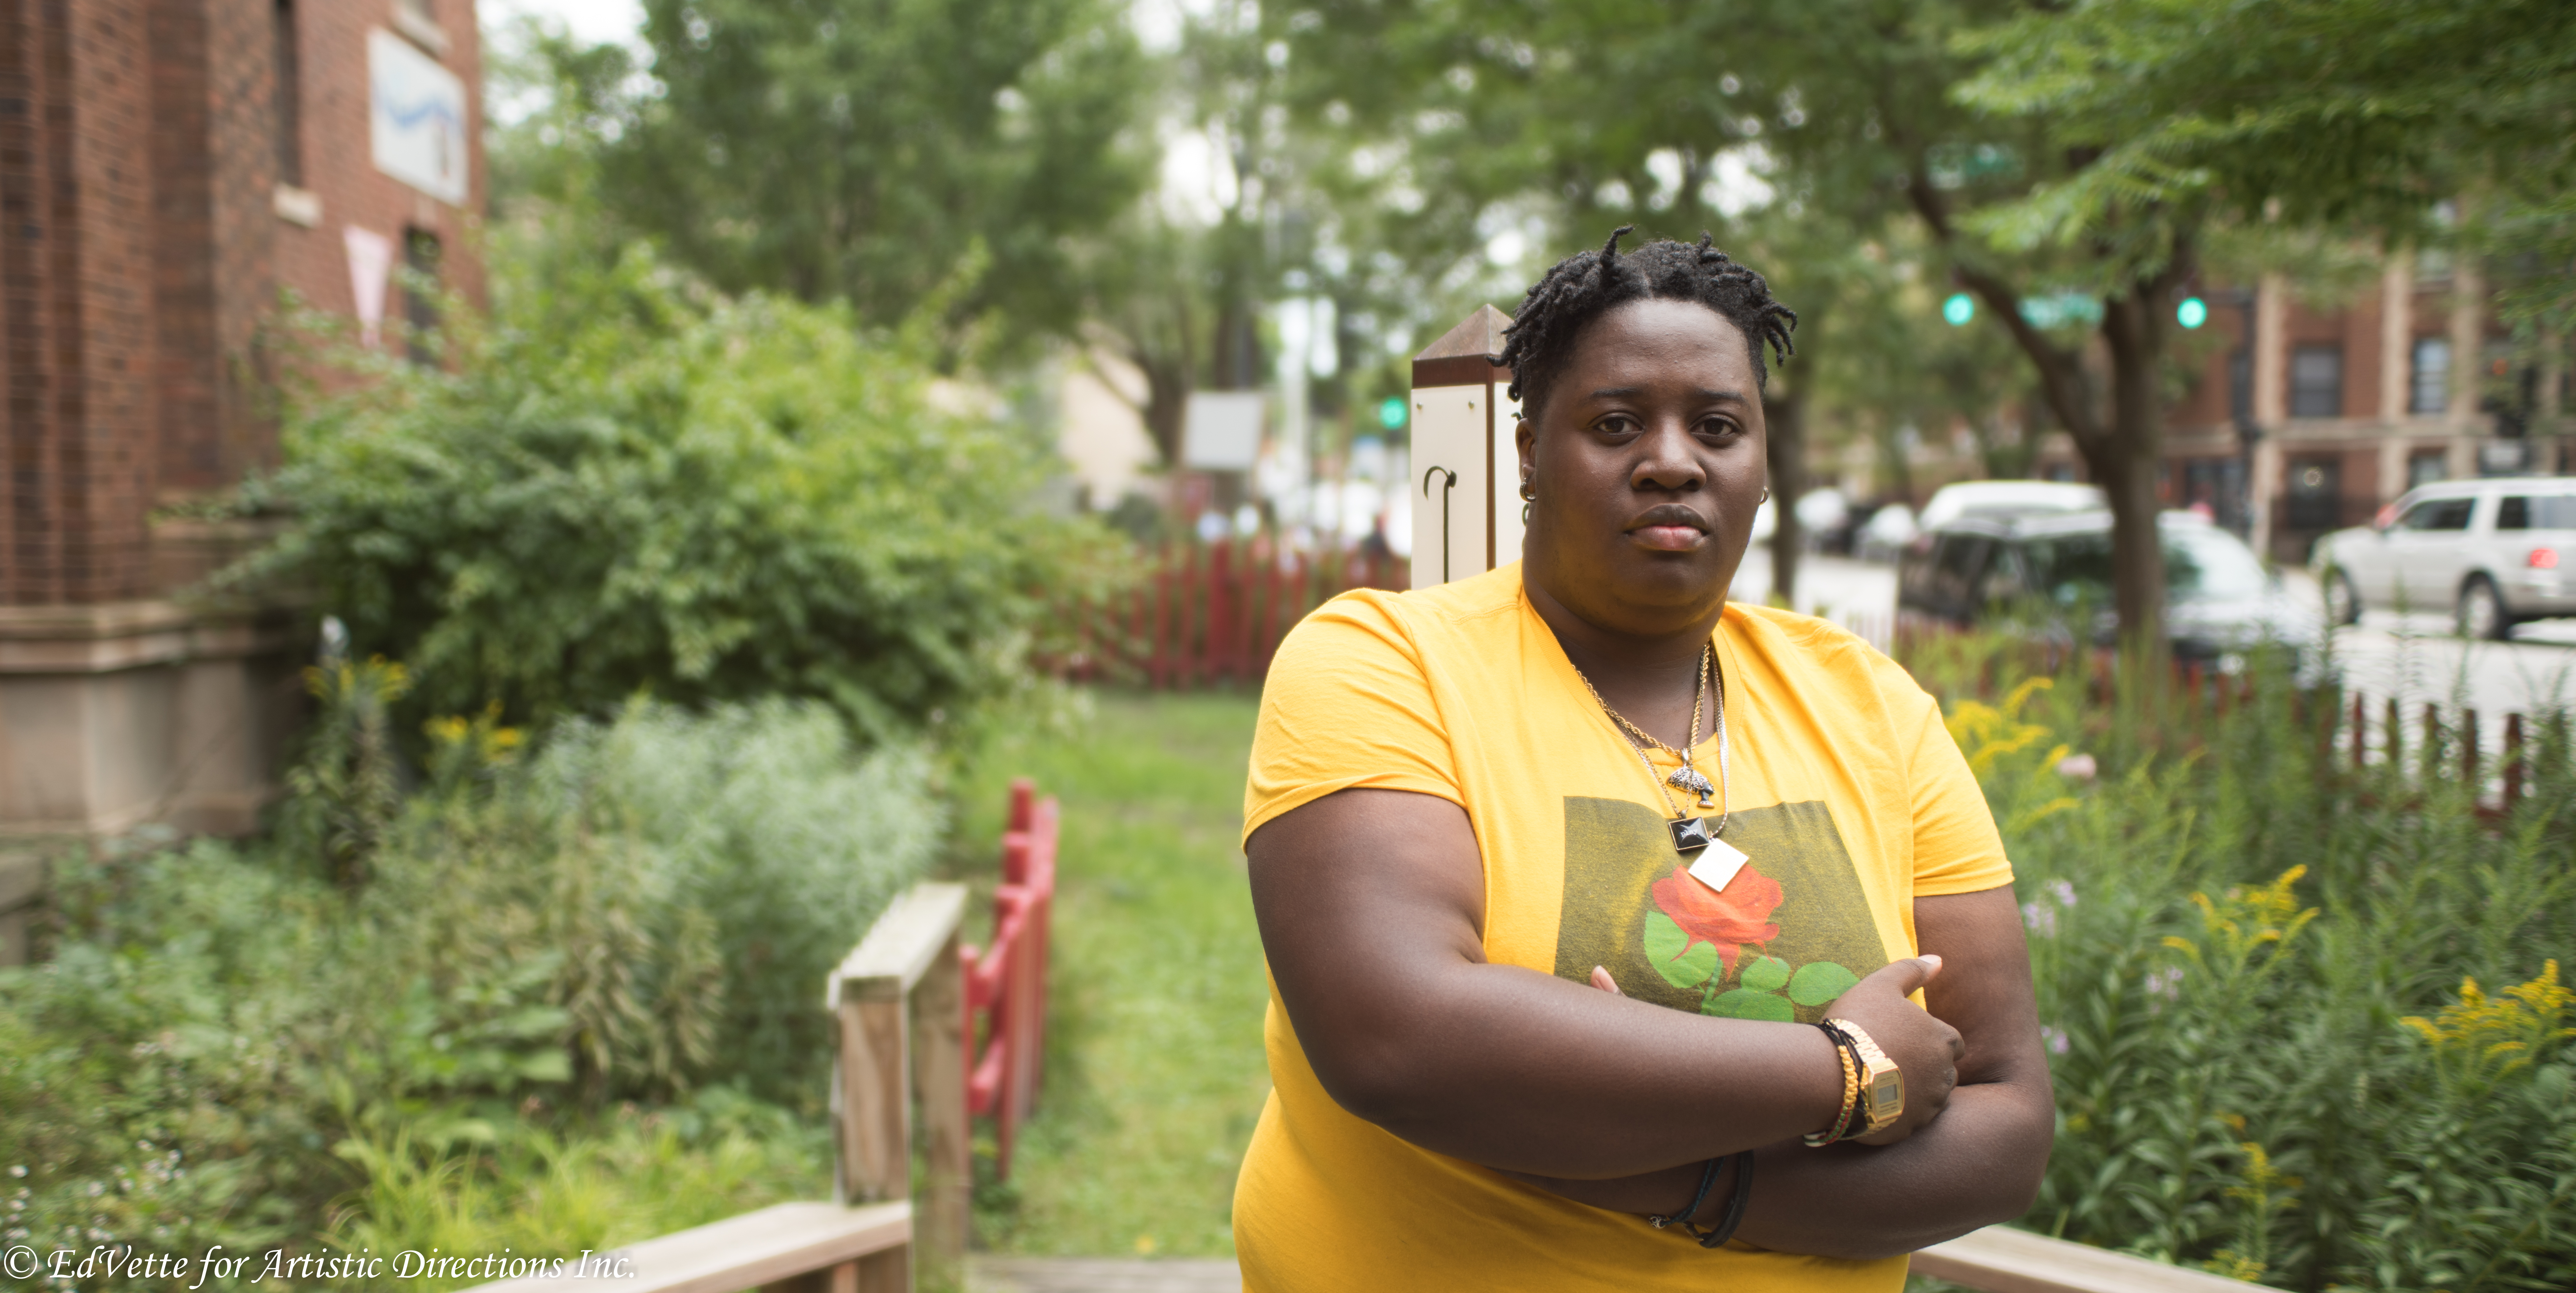 IMAGE: AnnMarie Brown stands in front of a garden area near the entrance of United Church of Rogers Park. She is staring at the camera with arms slightly folded wearing a yellow shirt with a red rose imprint on the front.